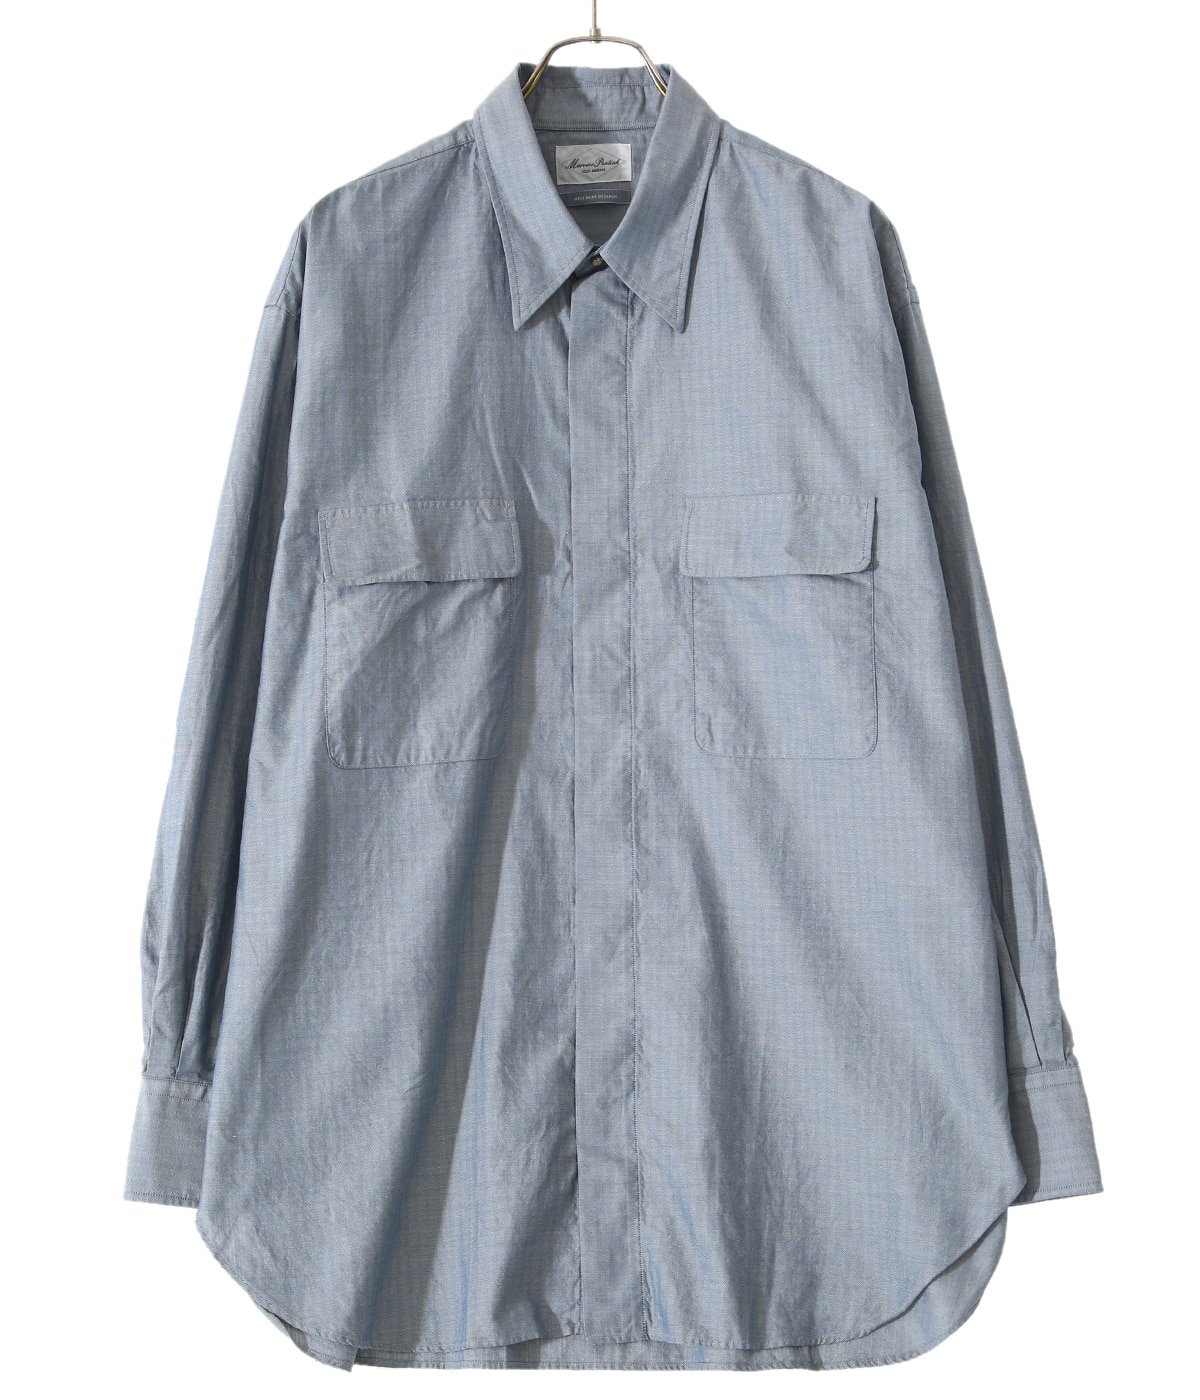 Fly Front 3 Button SH | Marvine Pontiak Shirt Makers(マービン